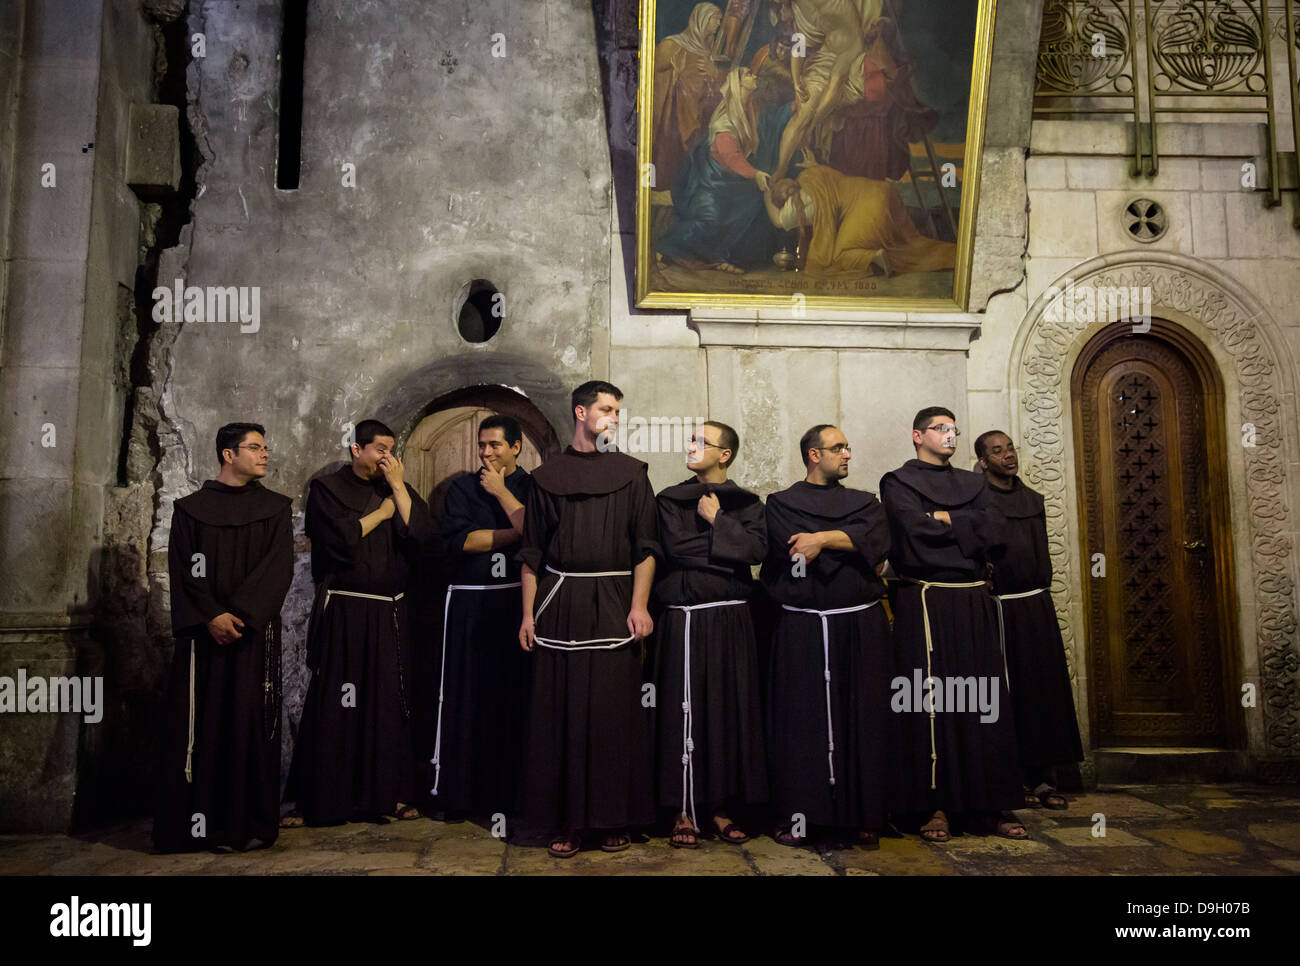 Franciscan monks at the church of the Holy Sepulchre in the old city, Jerusalem, Israel. Stock Photo